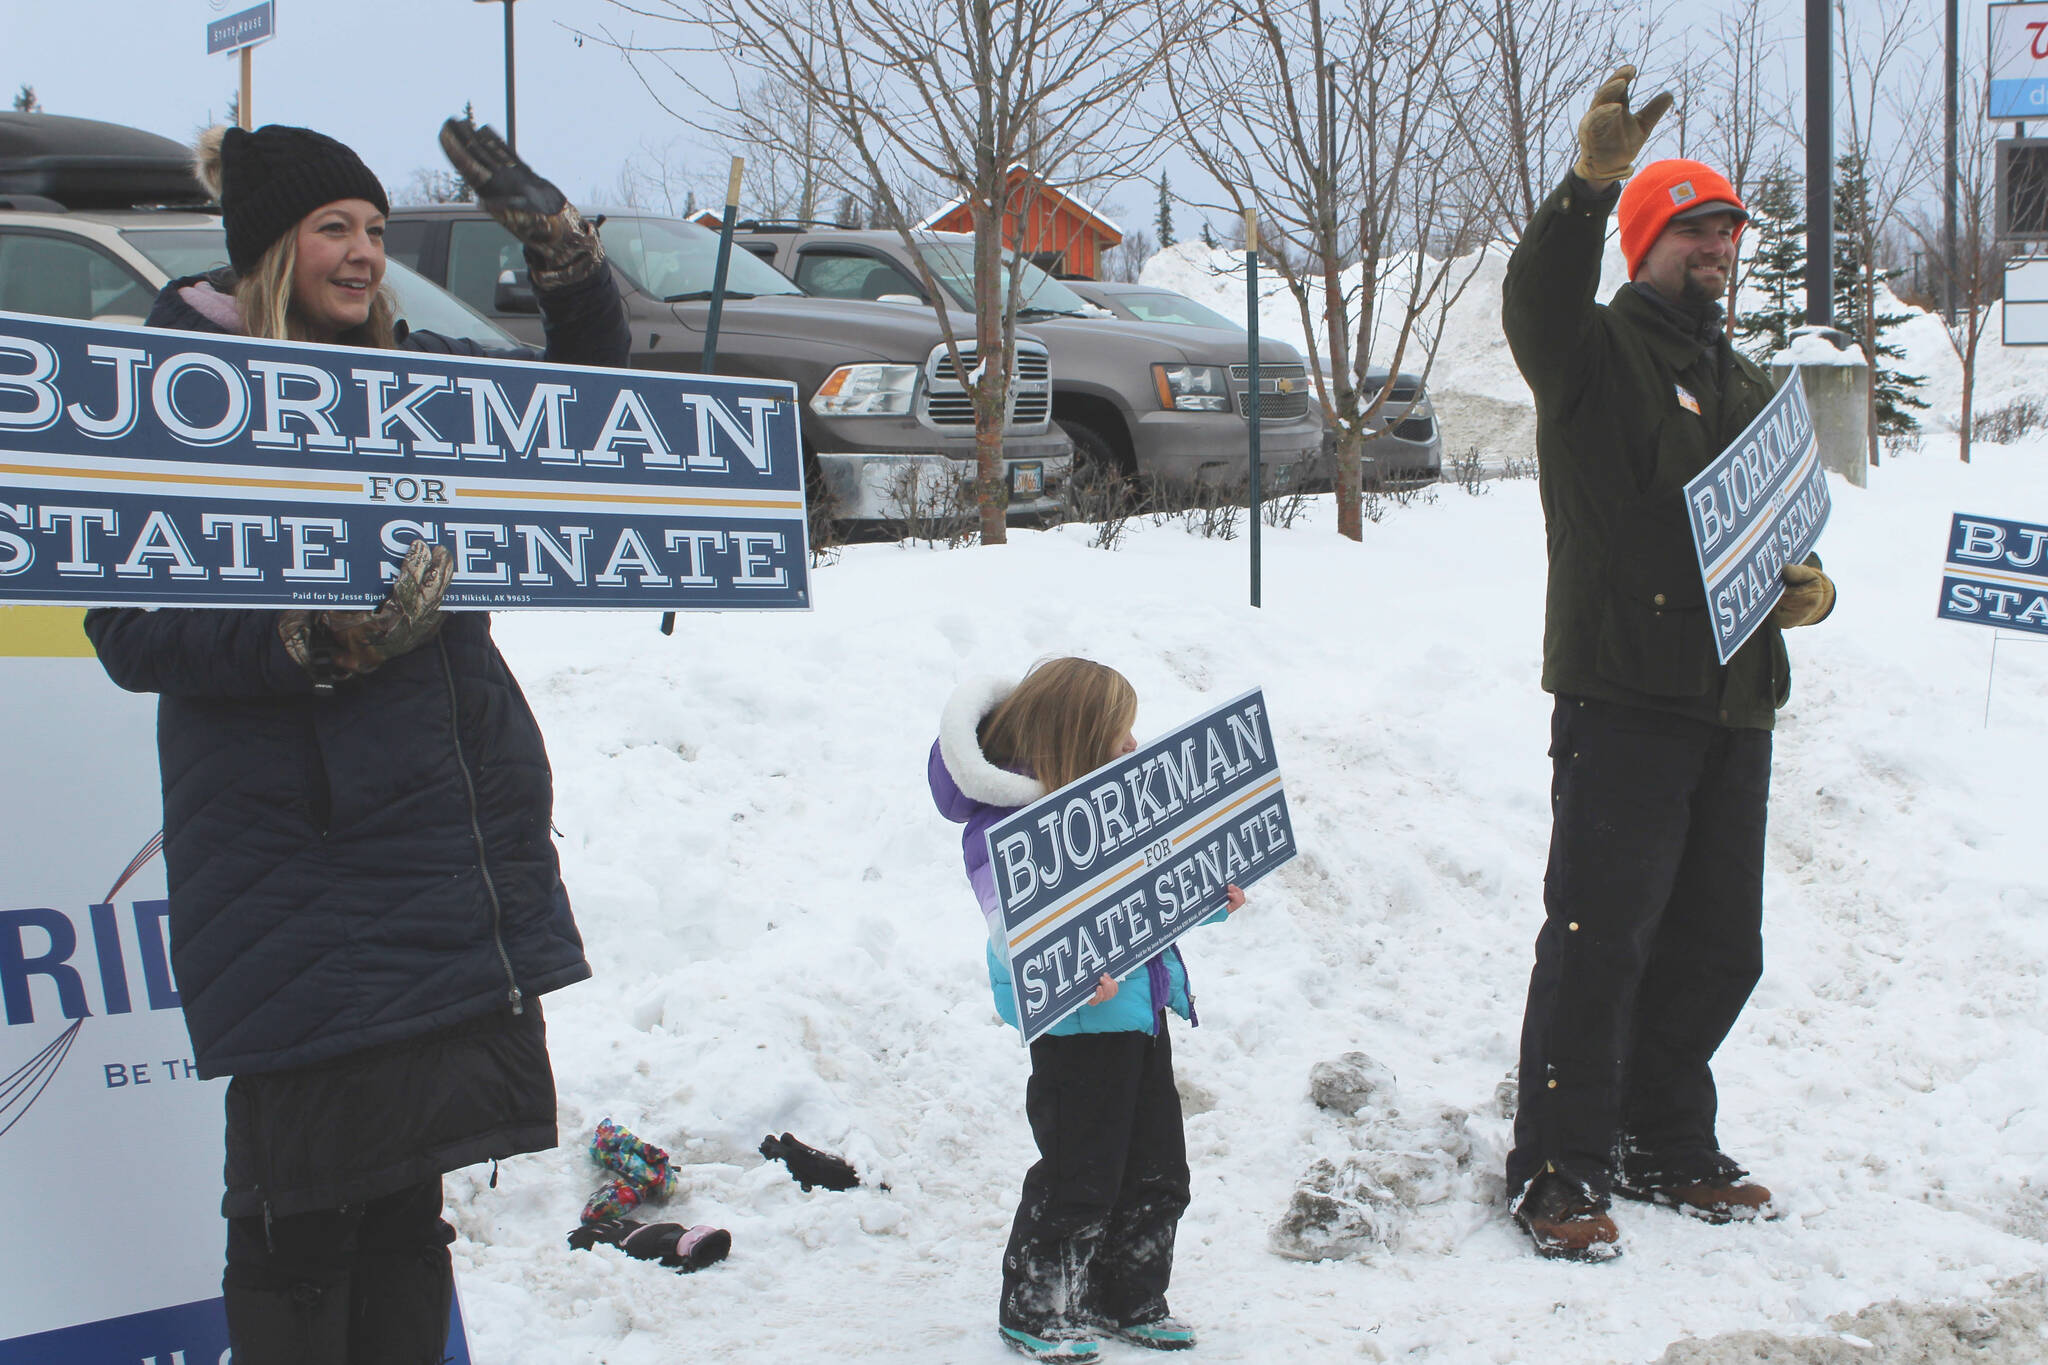 From left, Jamie, Brinna and Jesse Bjorkman wave signs supporting Jesse Bjorkman’s bid for Alaska State Senate at the intersection of the Kenai Spur and Sterling highways on Tuesday, Nov. 8, 2022 in Soldotna, Alaska. (Ashlyn O’Hara/Peninsula Clarion)